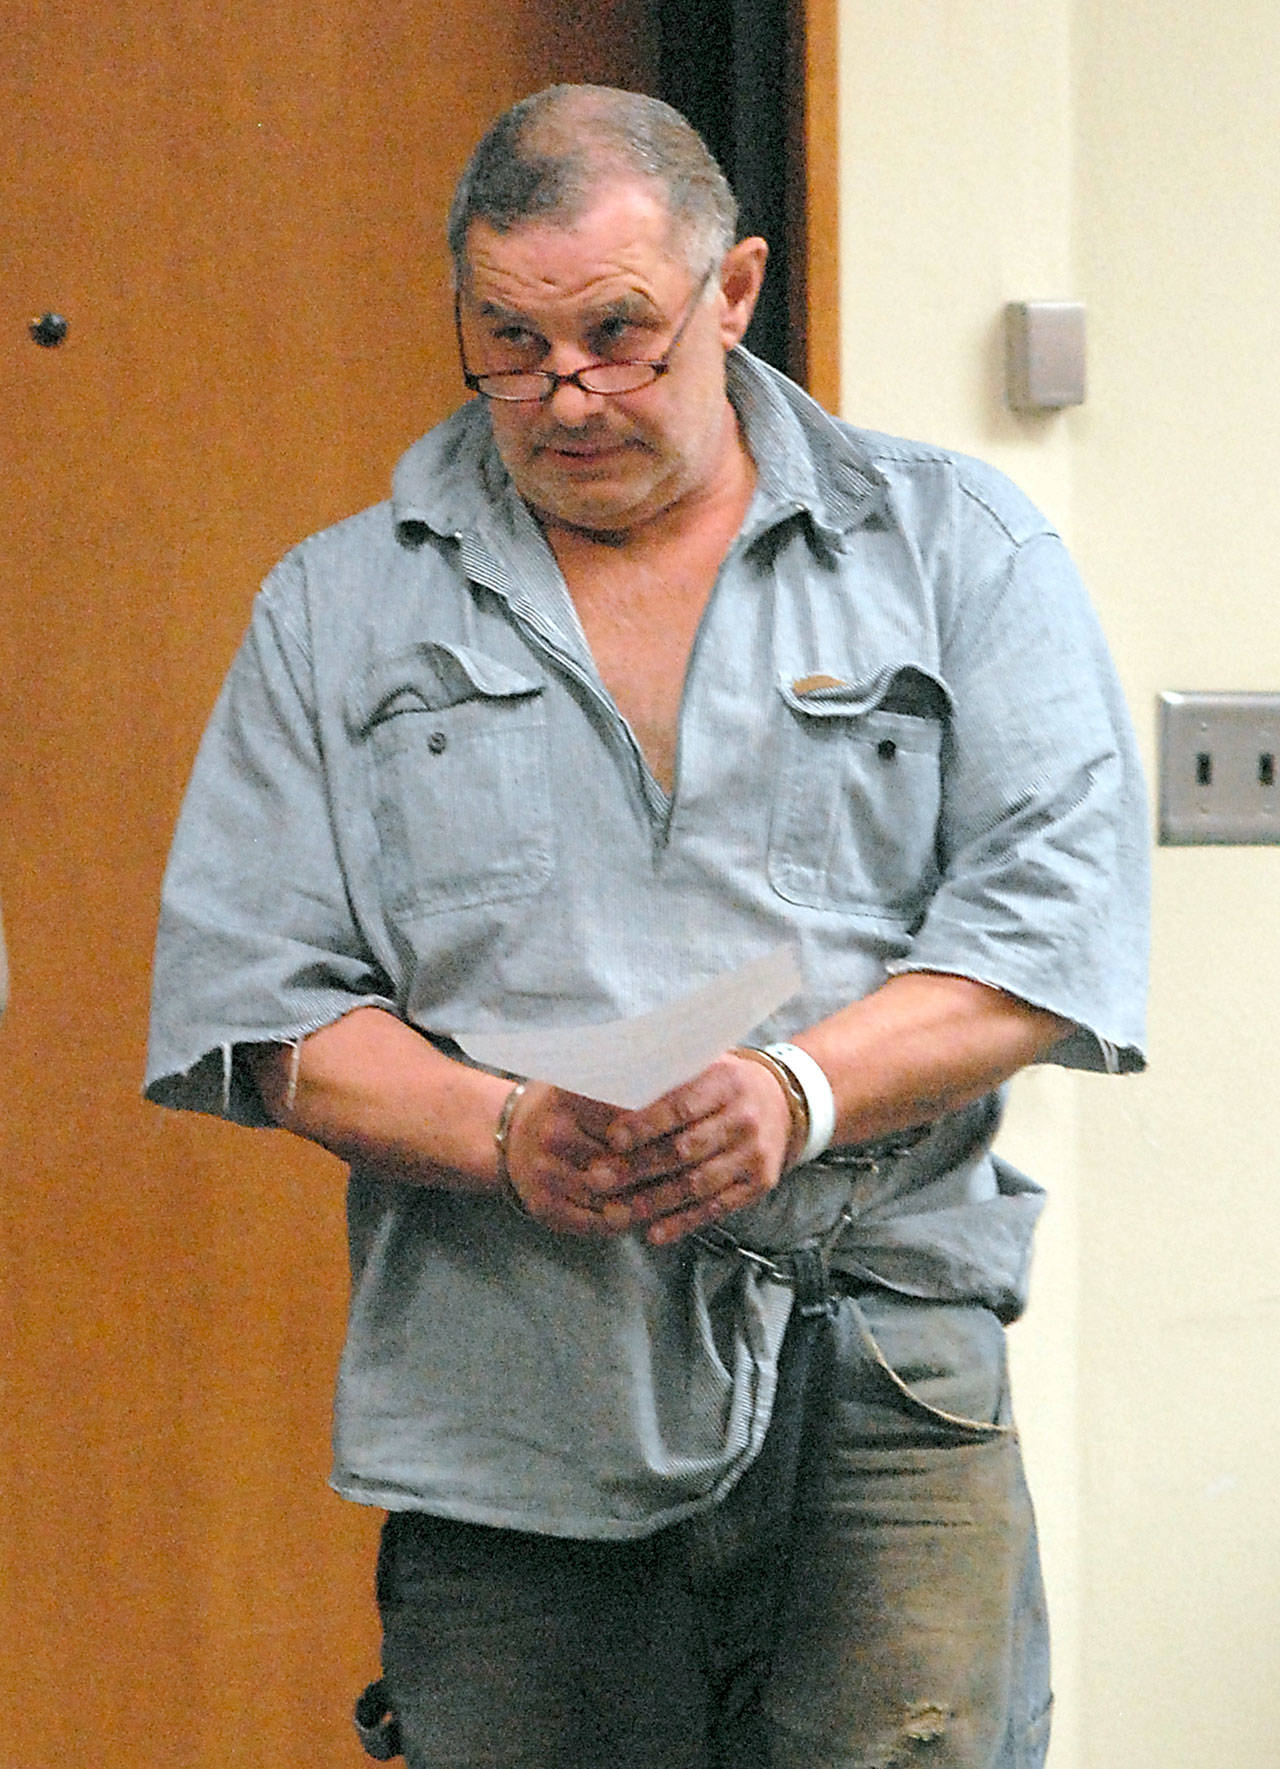 Roger Garman of Sequim enters Clallam County Superior Court in Port Angeles in connection with alleged threats made to a Jamestown S’Klallam school bus driver and the tribal office. (Keith Thorpe/Peninsula Daily News)                                Roger Garman of Sequim enters Clallam County Superior Court in Port Angeles. (Keith Thorpe/Peninsula Daily News)